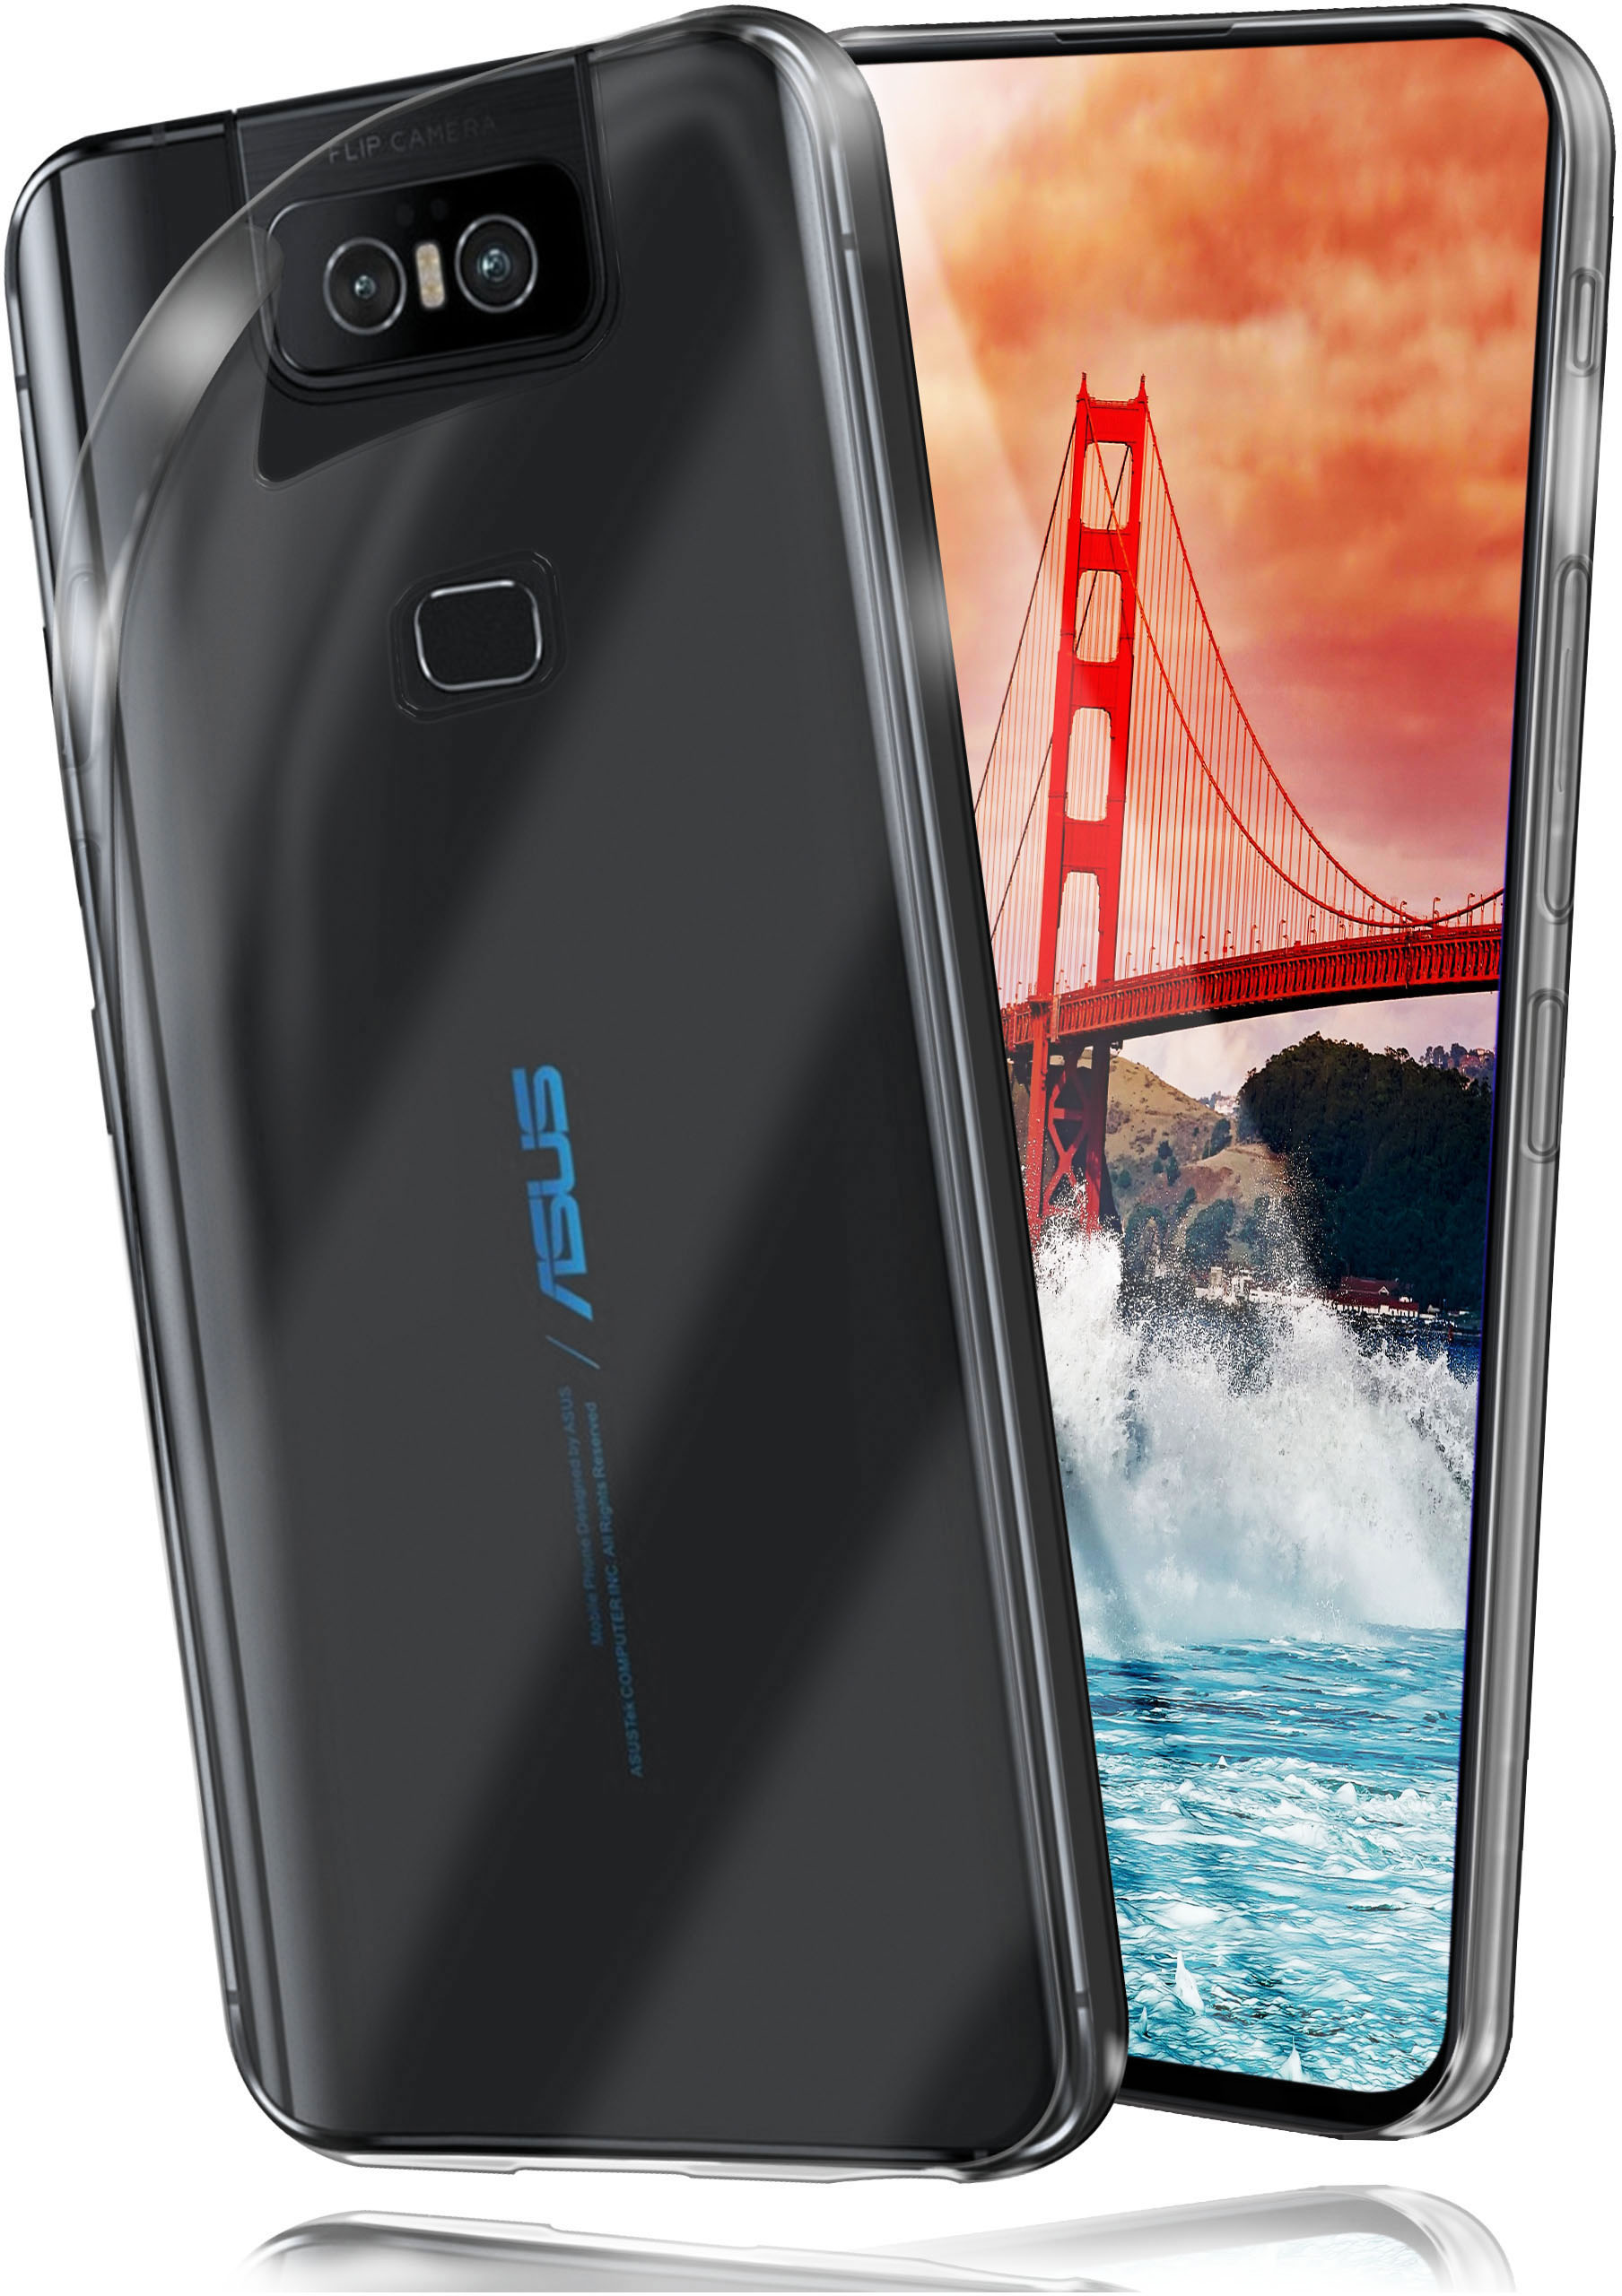 6 Asus (2019), MOEX Aero Backcover, Crystal-Clear Case, ASUS, Zenfone